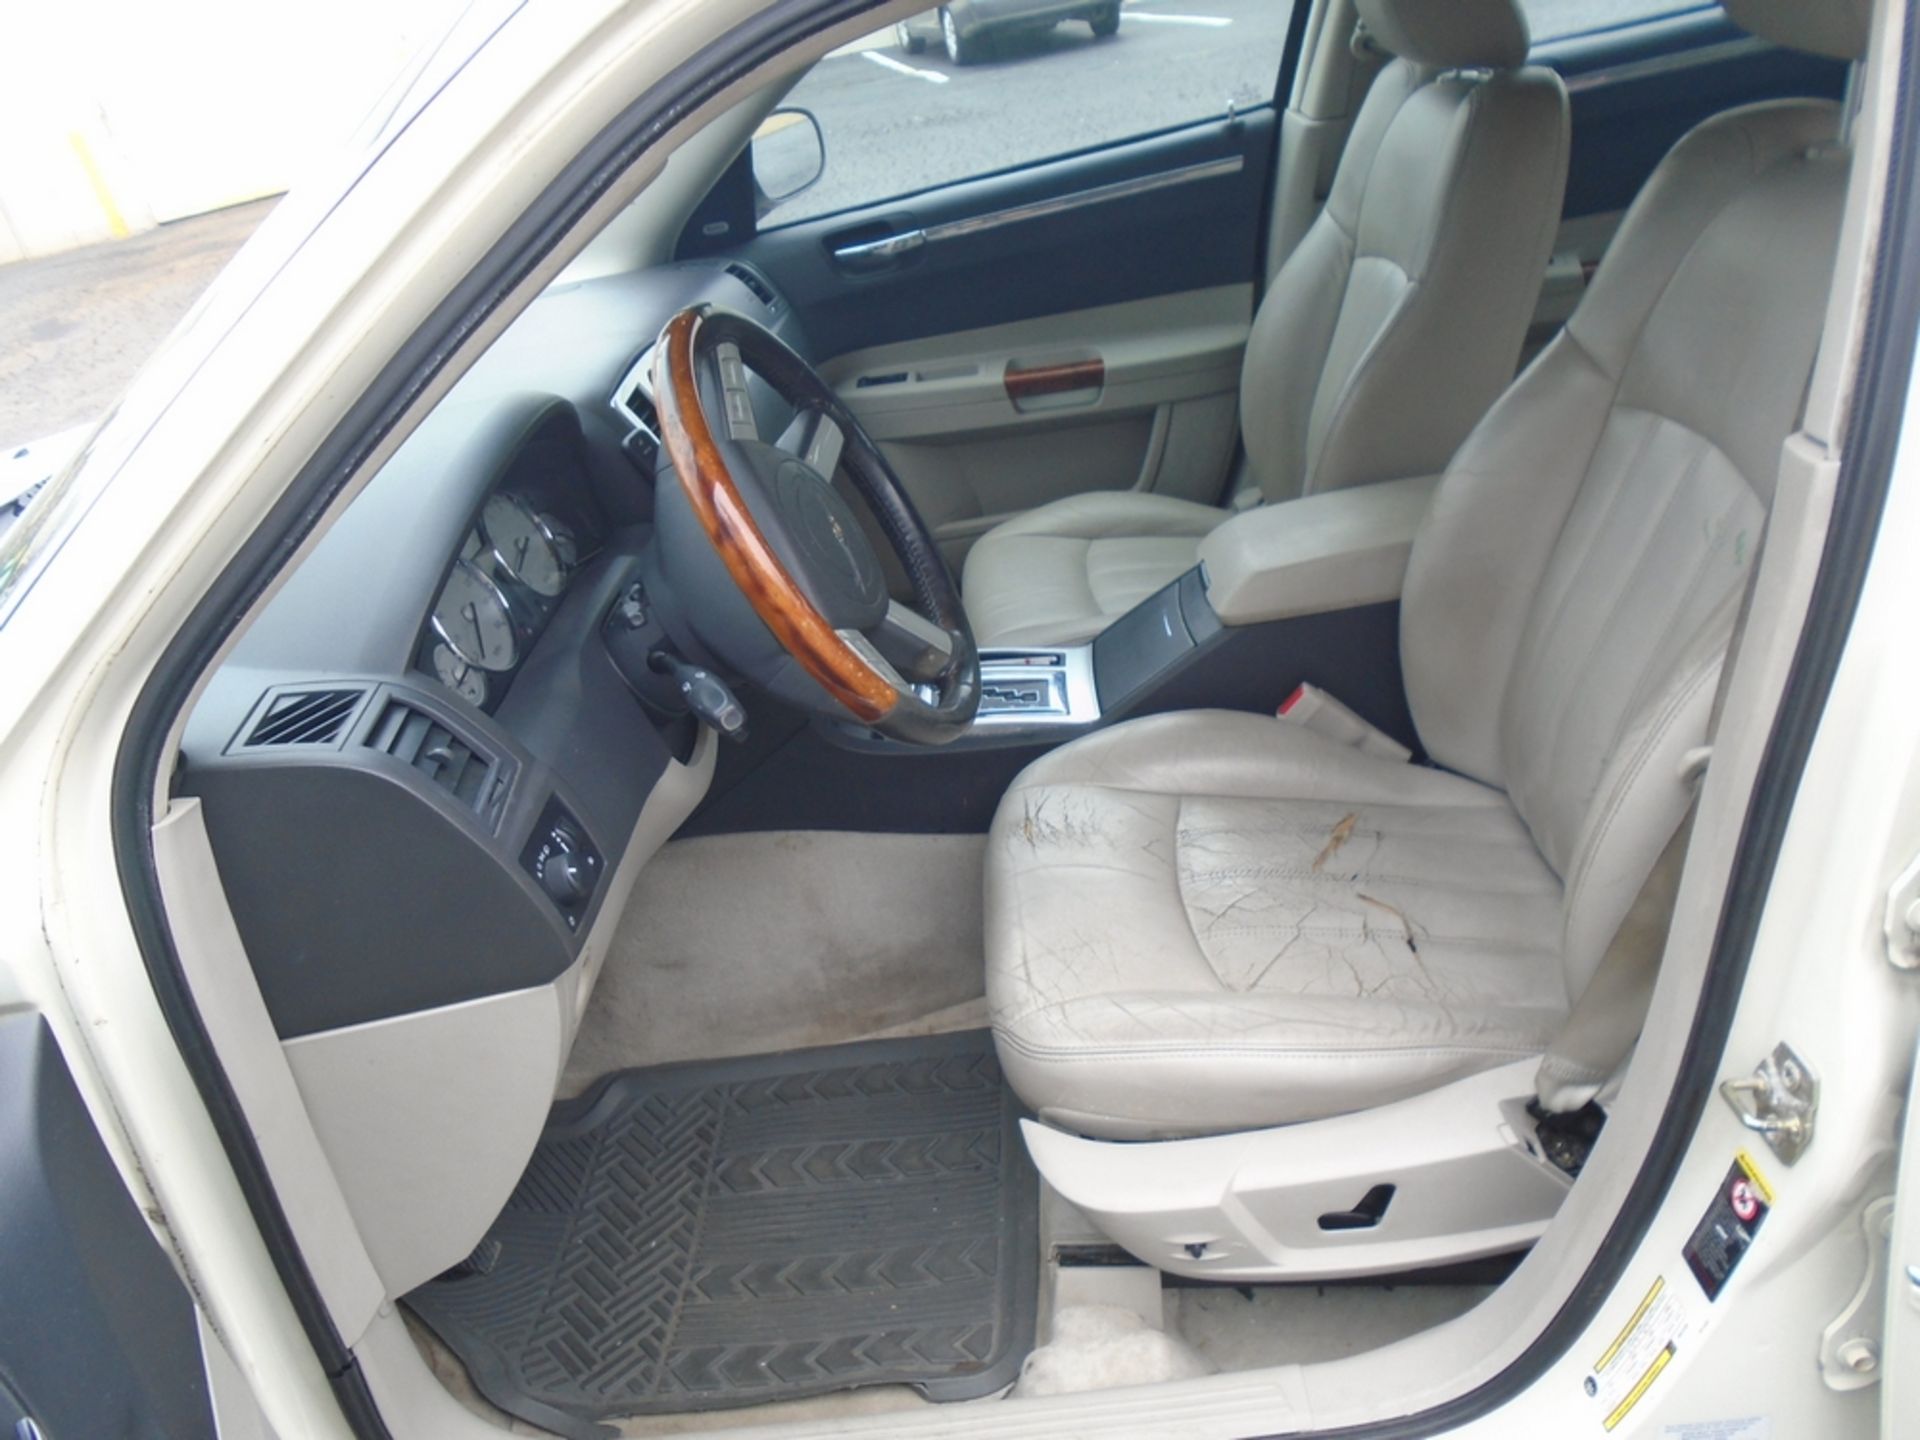 2005 Chrysler 300C Leather Interior Brand New Tires Full Spare Tire AC, Navigation, Blue Tooth - Image 9 of 13